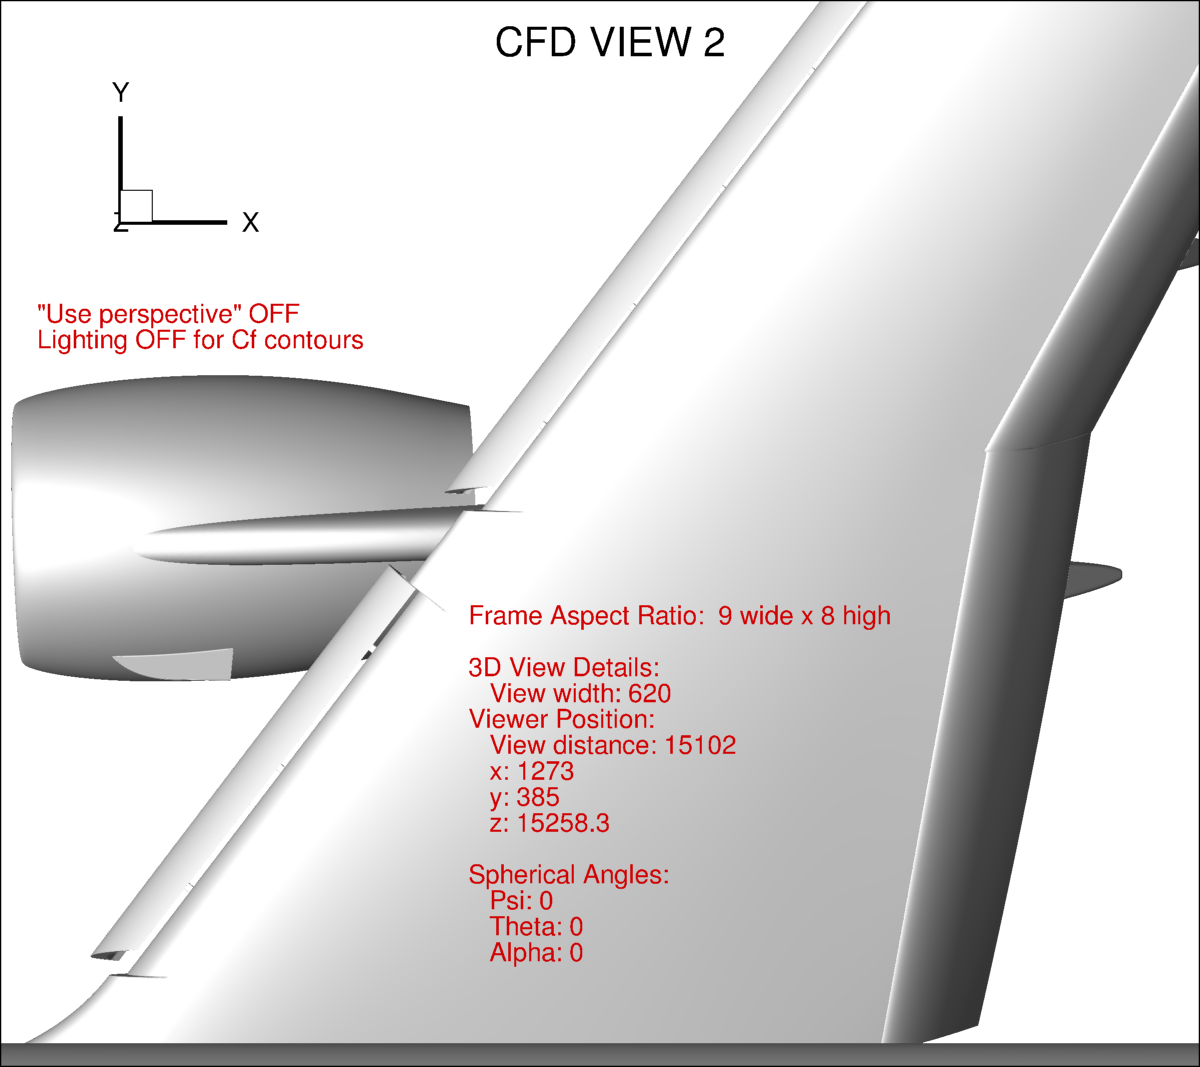 Example CFD view #2